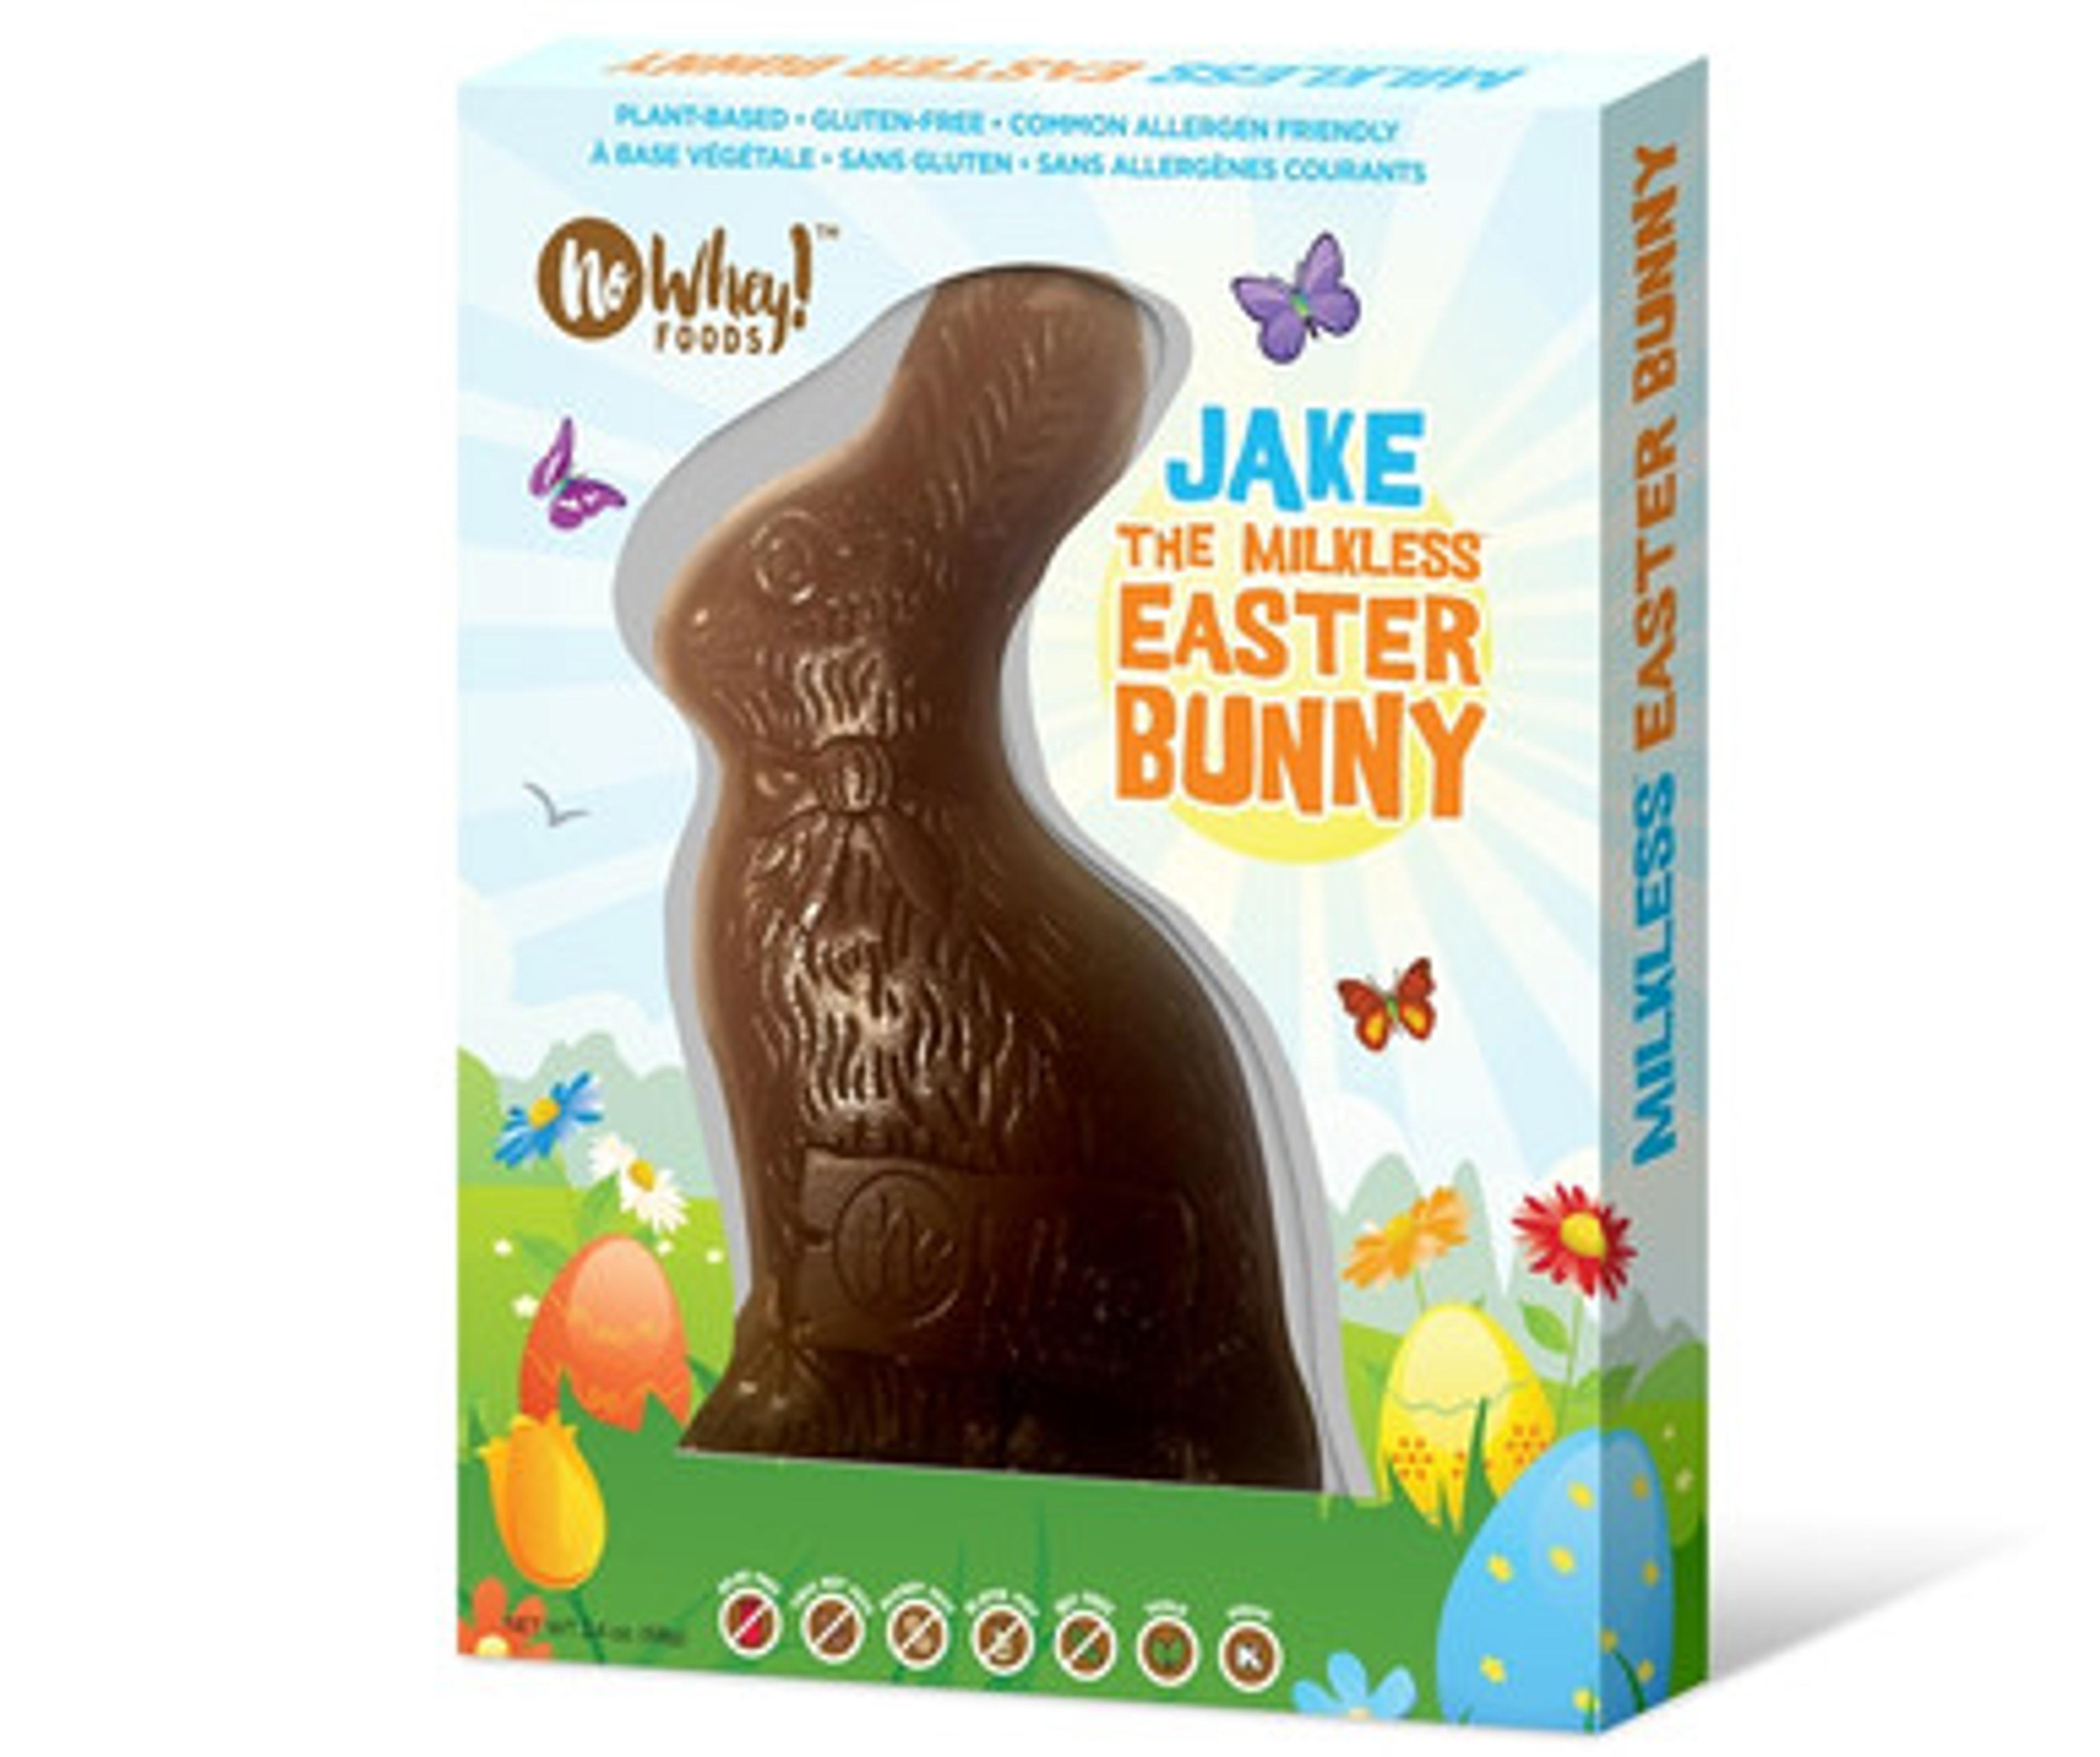 Jake the Milkless Easter Bunny - No Whey Chocolate